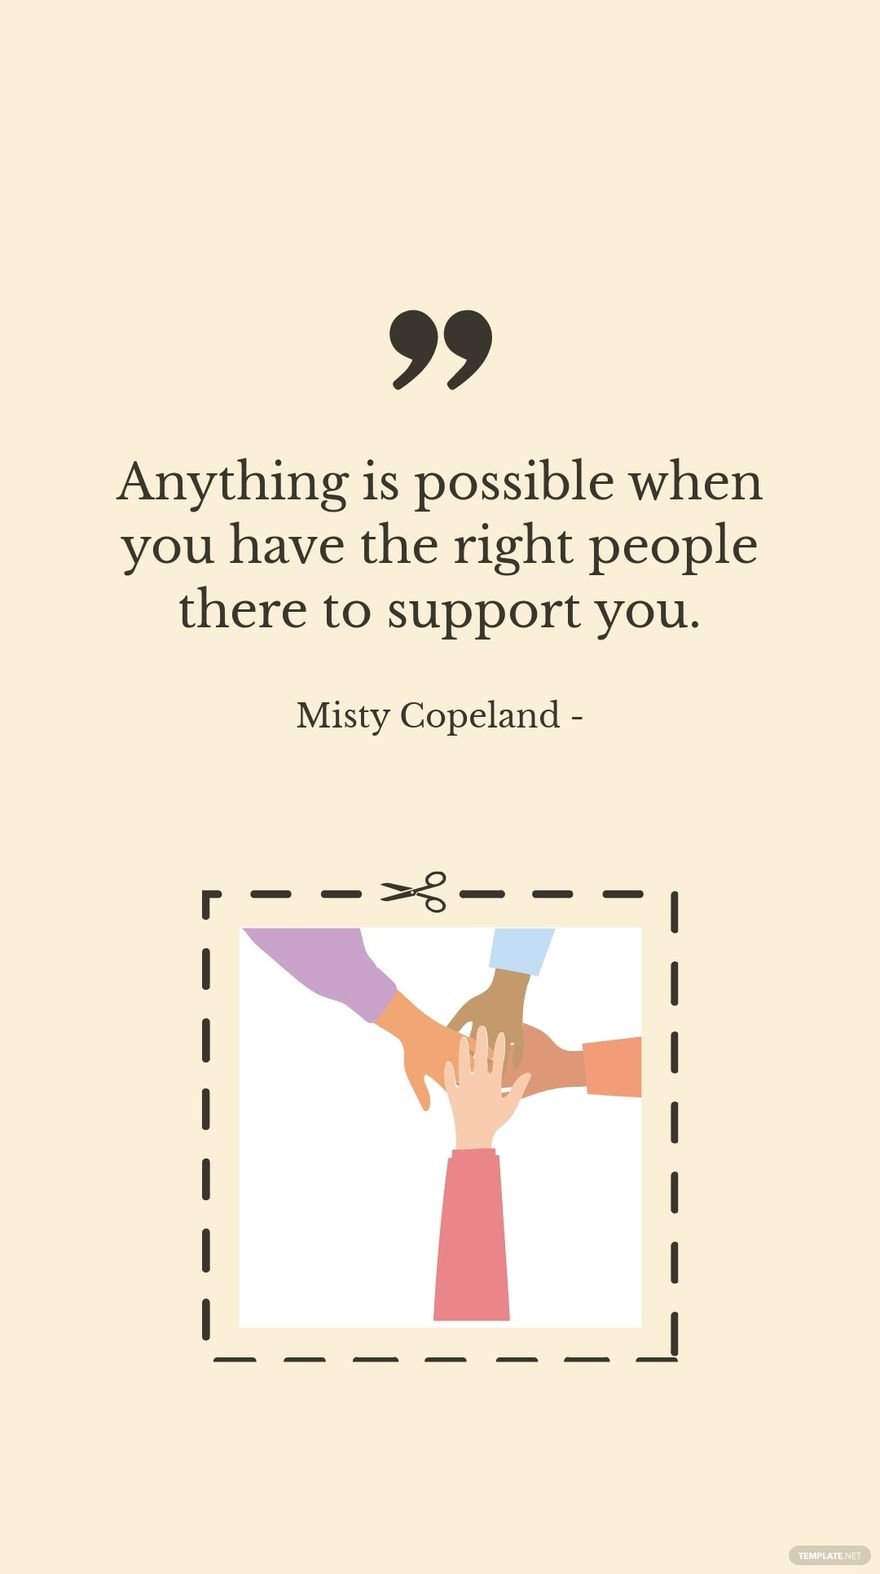 Free Misty Copeland - Anything is possible when you have the right people there to support you. in JPG